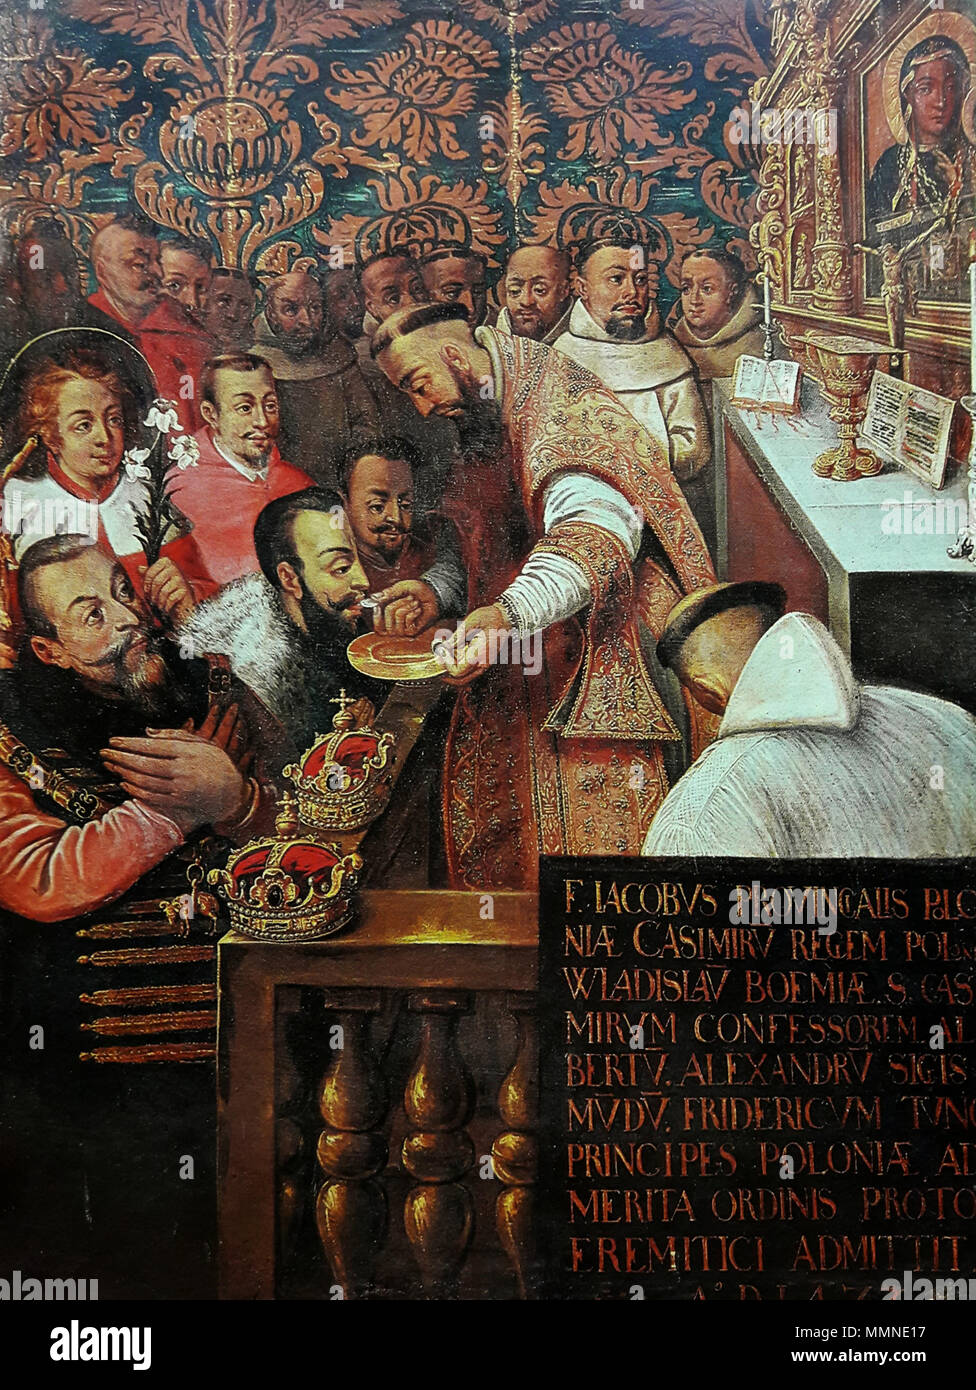 Communion of the Jagiellons at Jasna Góra in 1477 (Casimir IV Jagiellon with his sons admitted to Jasna Góra Confraternity).. second quarter of 17th century. Dolabella Communion of the Jagiellons Stock Photo